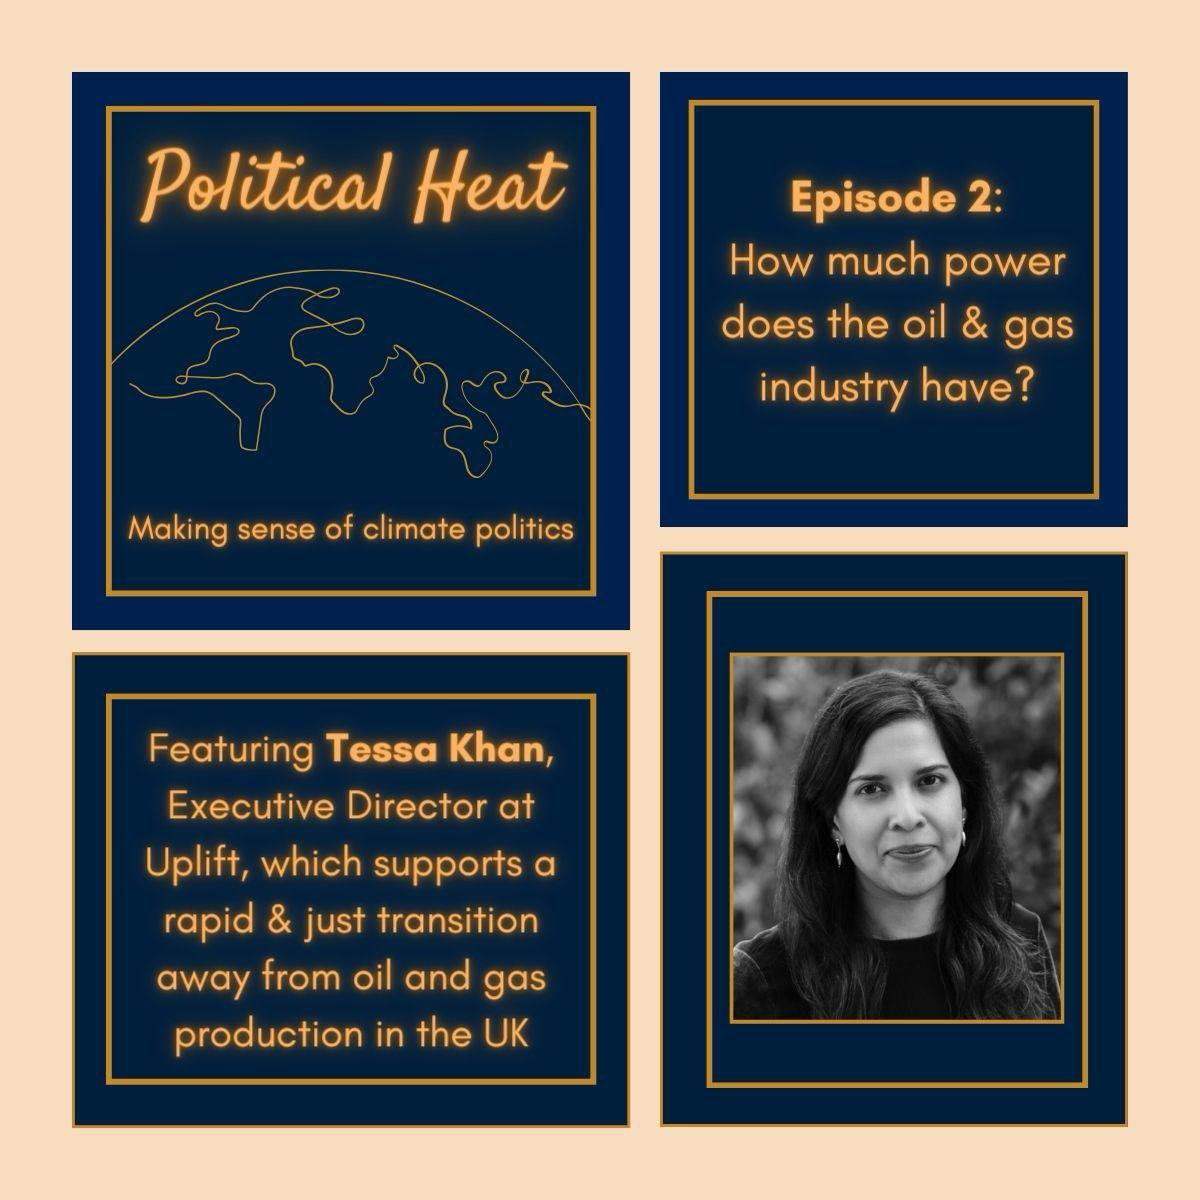 Does the fight over the windfall #tax show that the #oil industry’s power could be dwindling in the UK? We consider this - and much more - in the latest episode of Political Heat, with campaigner @tessakhan political-heat.captivate.fm